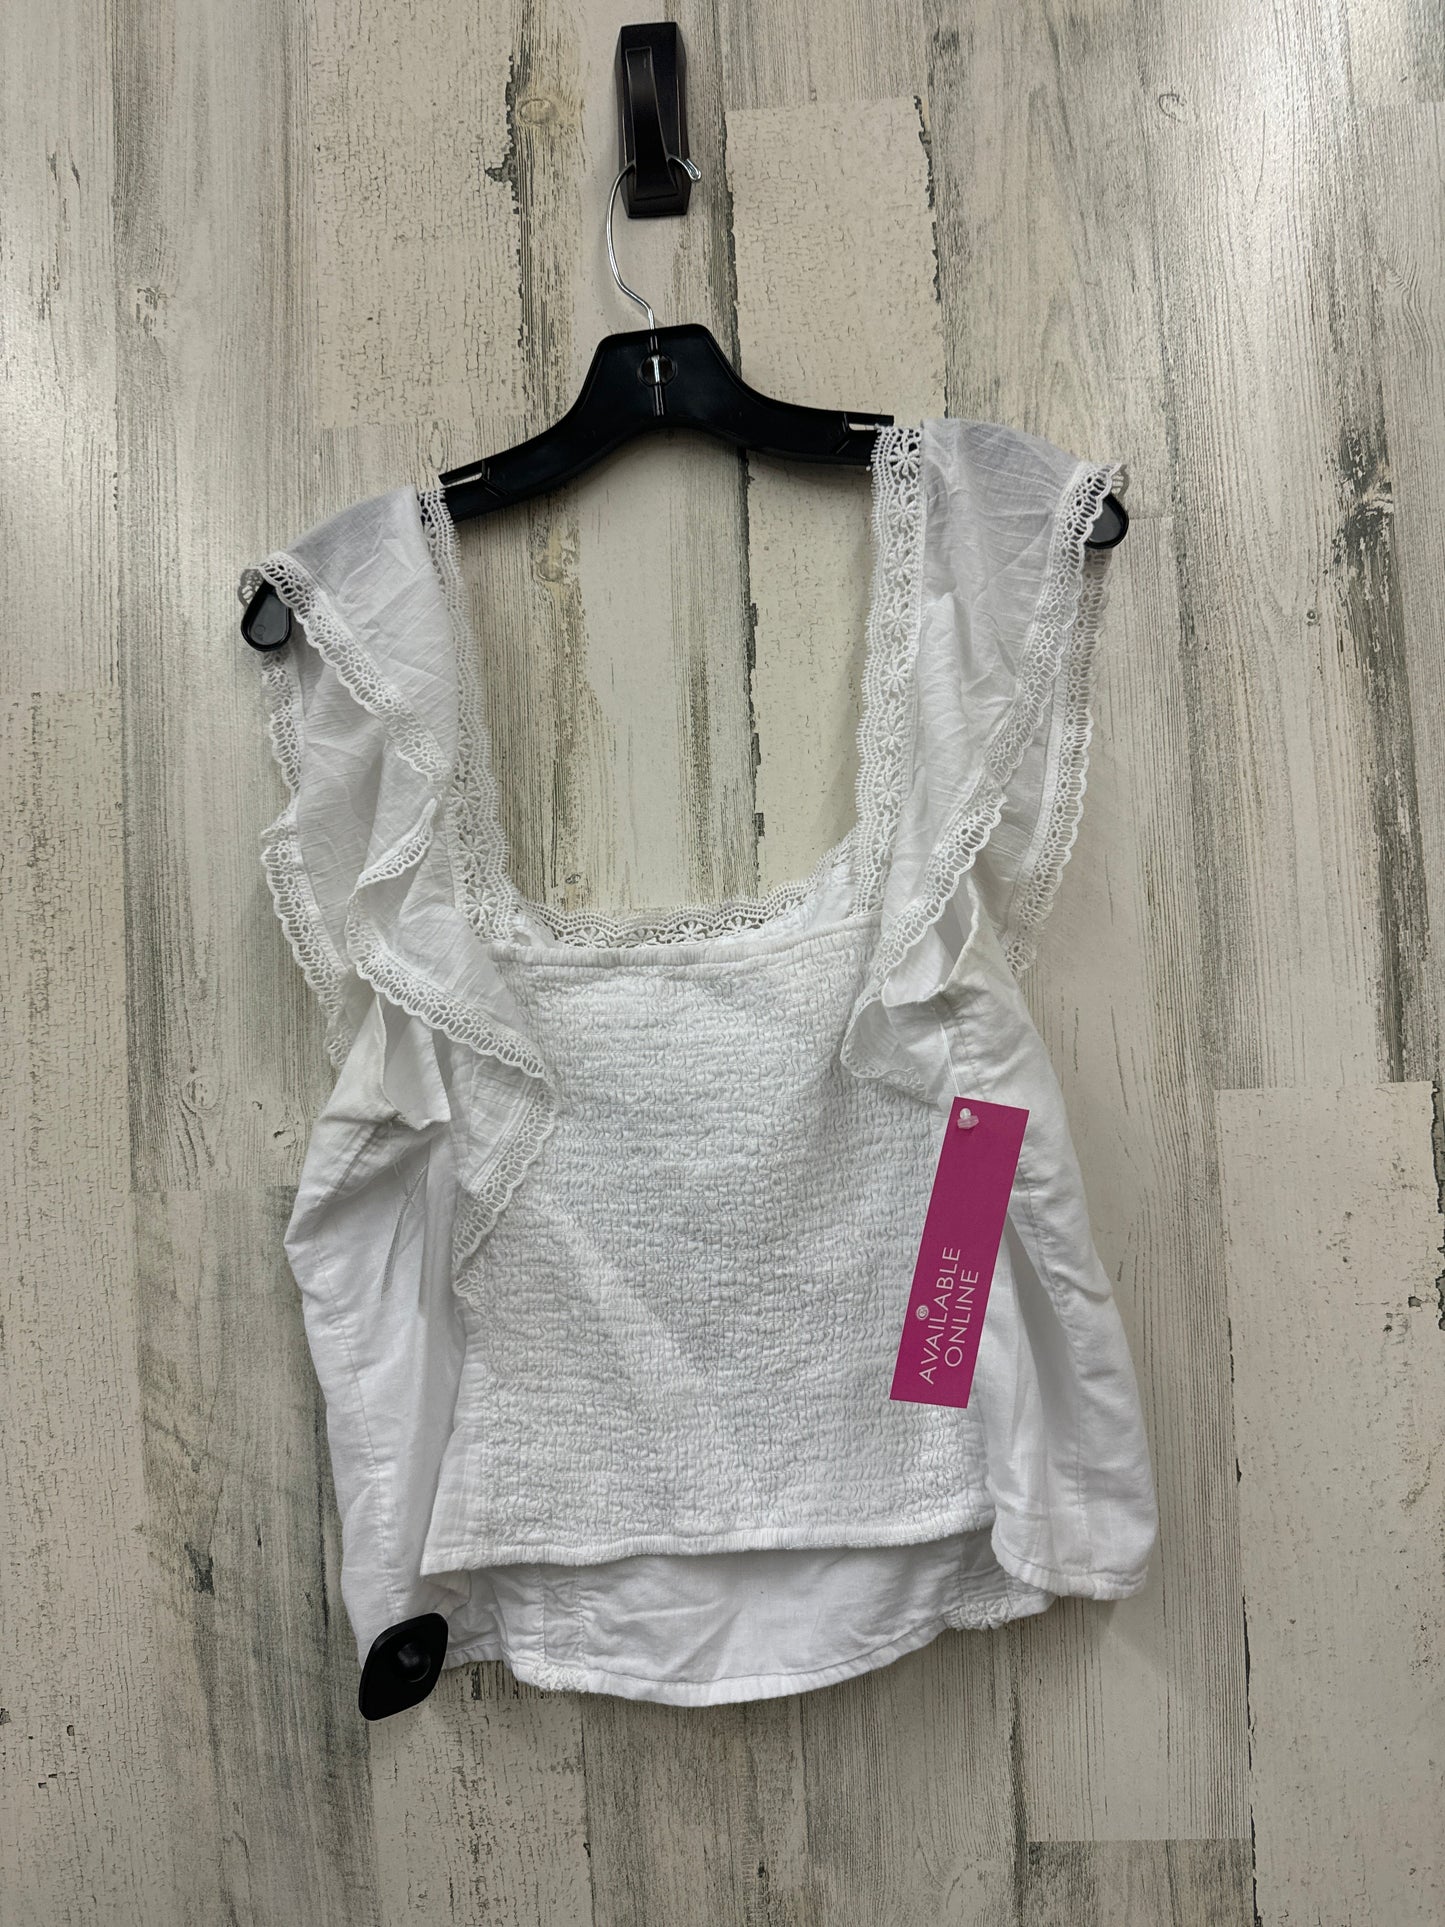 White Top Sleeveless Abercrombie And Fitch, Size L